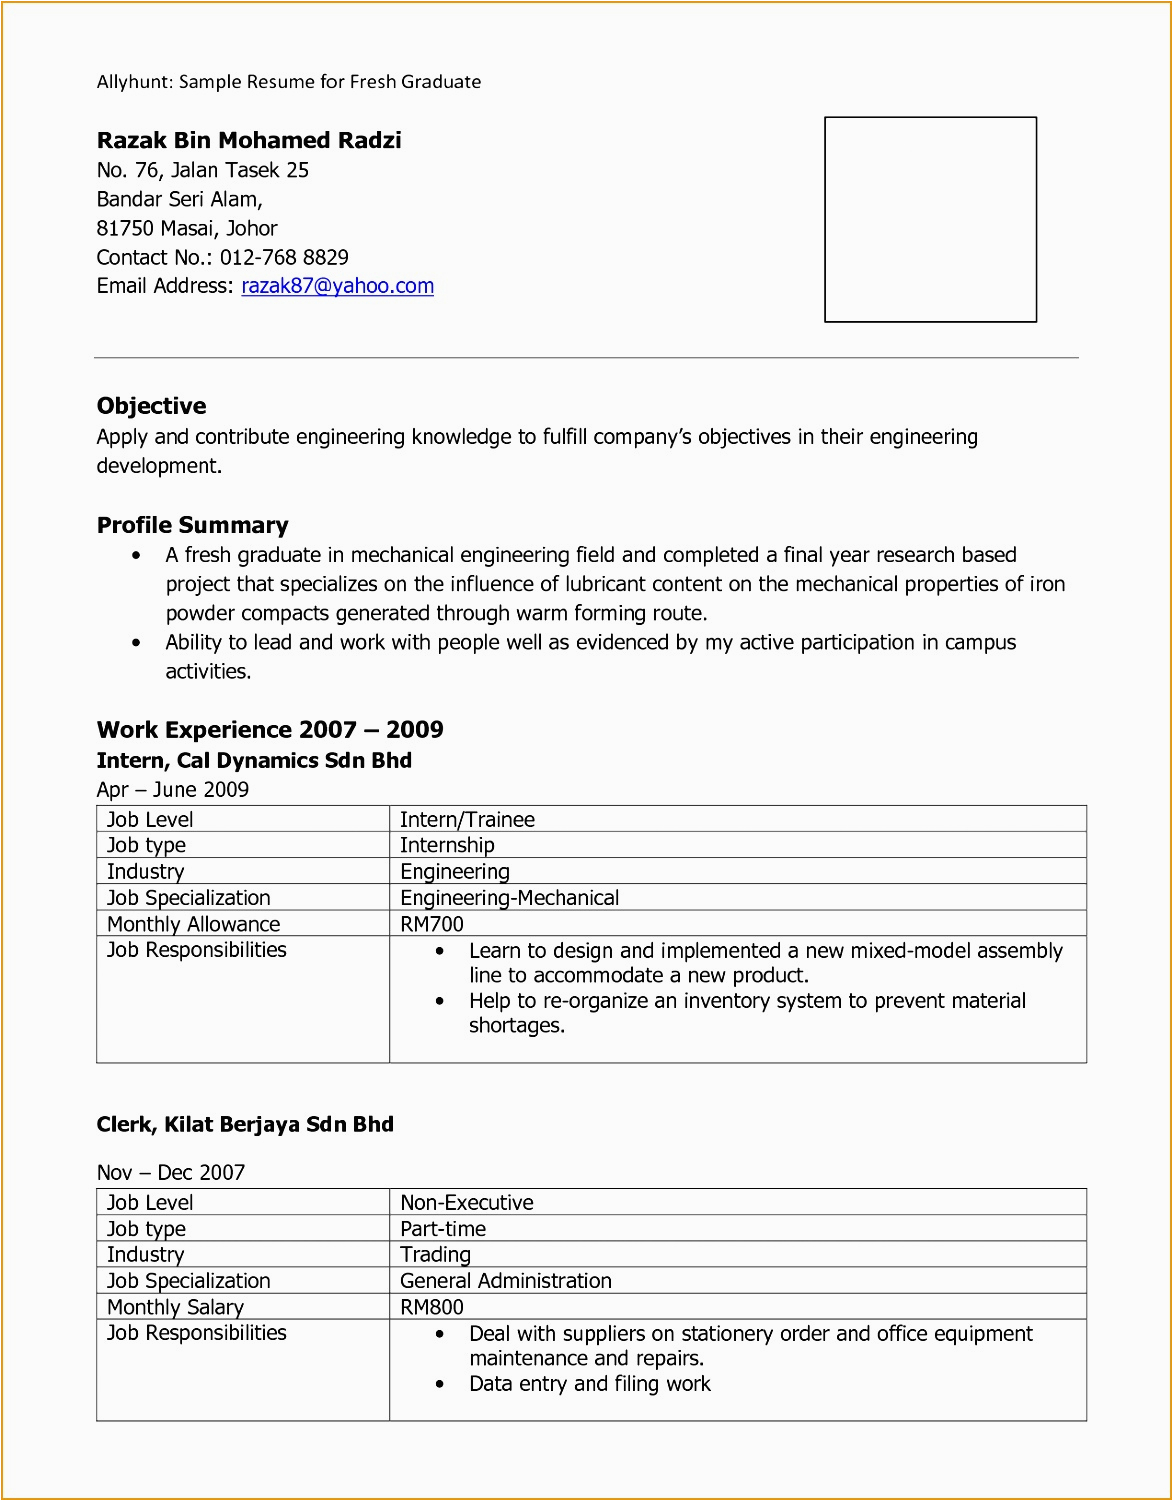 Sample Resume for Banking and Finance Fresh Graduate 9 Example Resume for Fresh Graduate